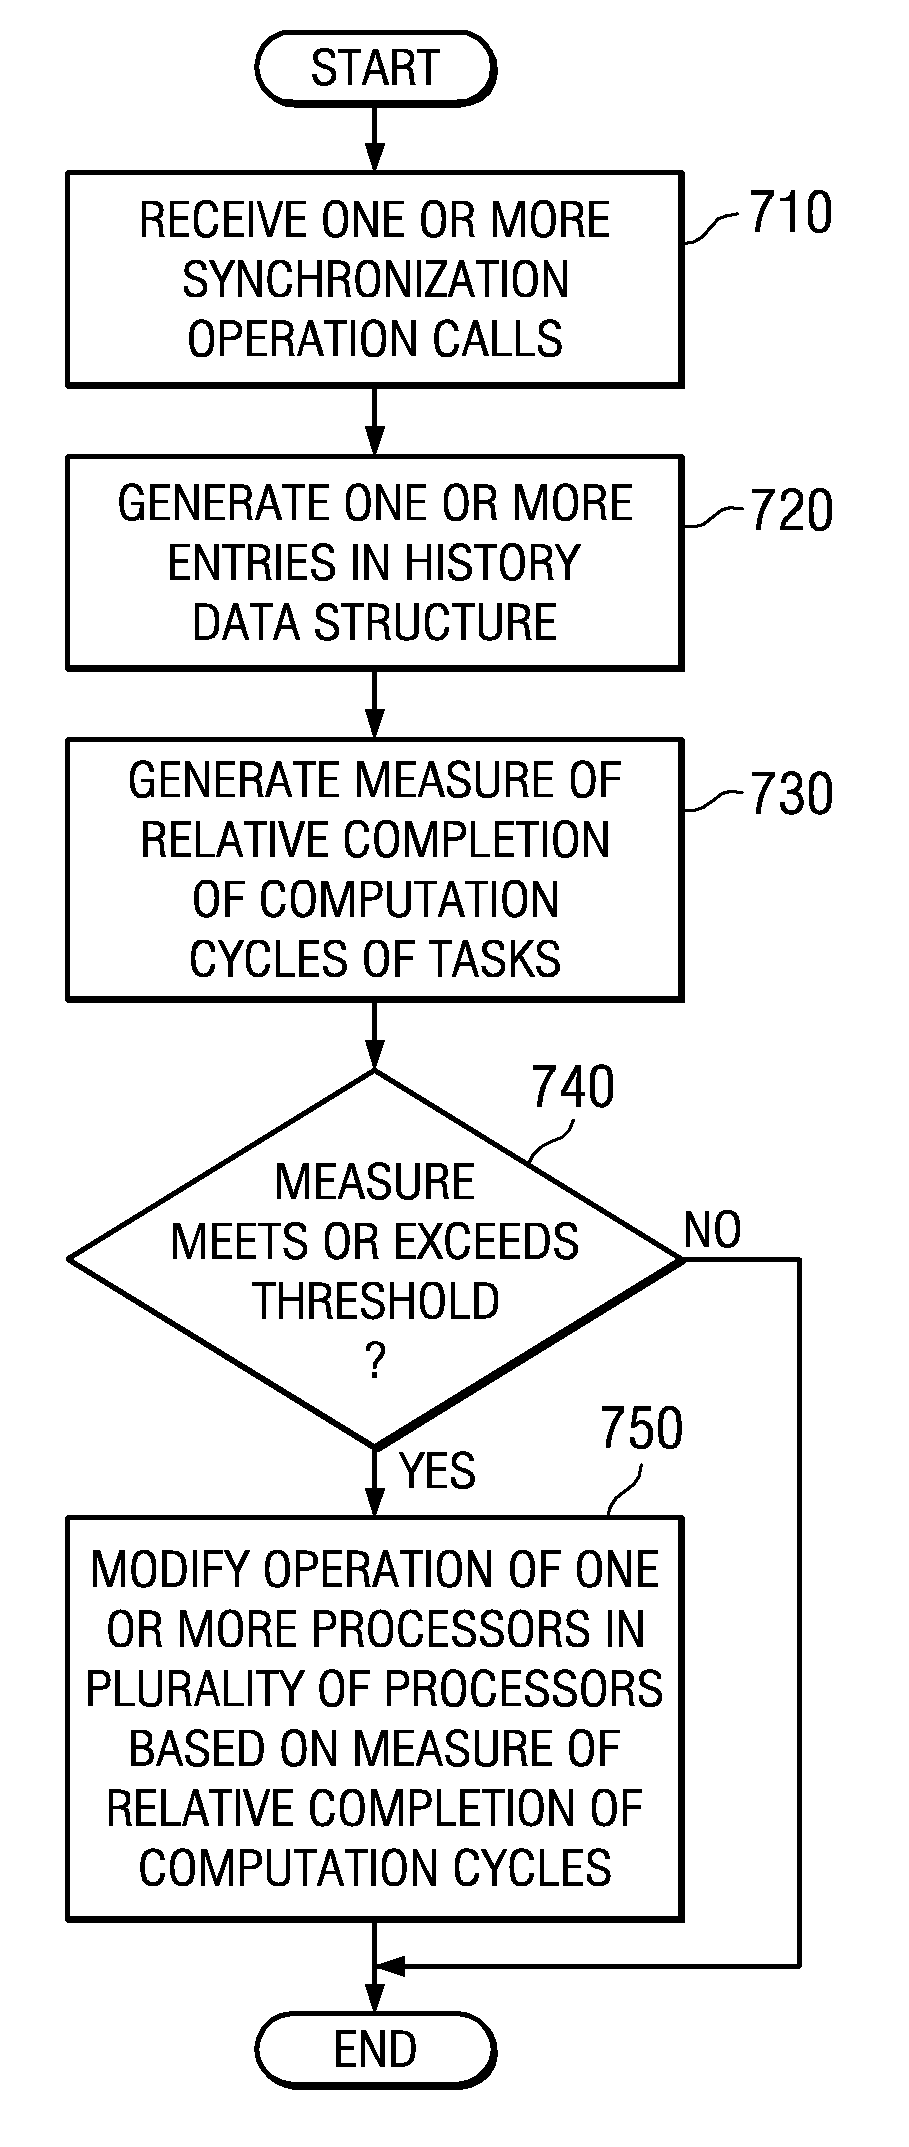 Performing setup operations for receiving different amounts of data while processors are performing message passing interface tasks